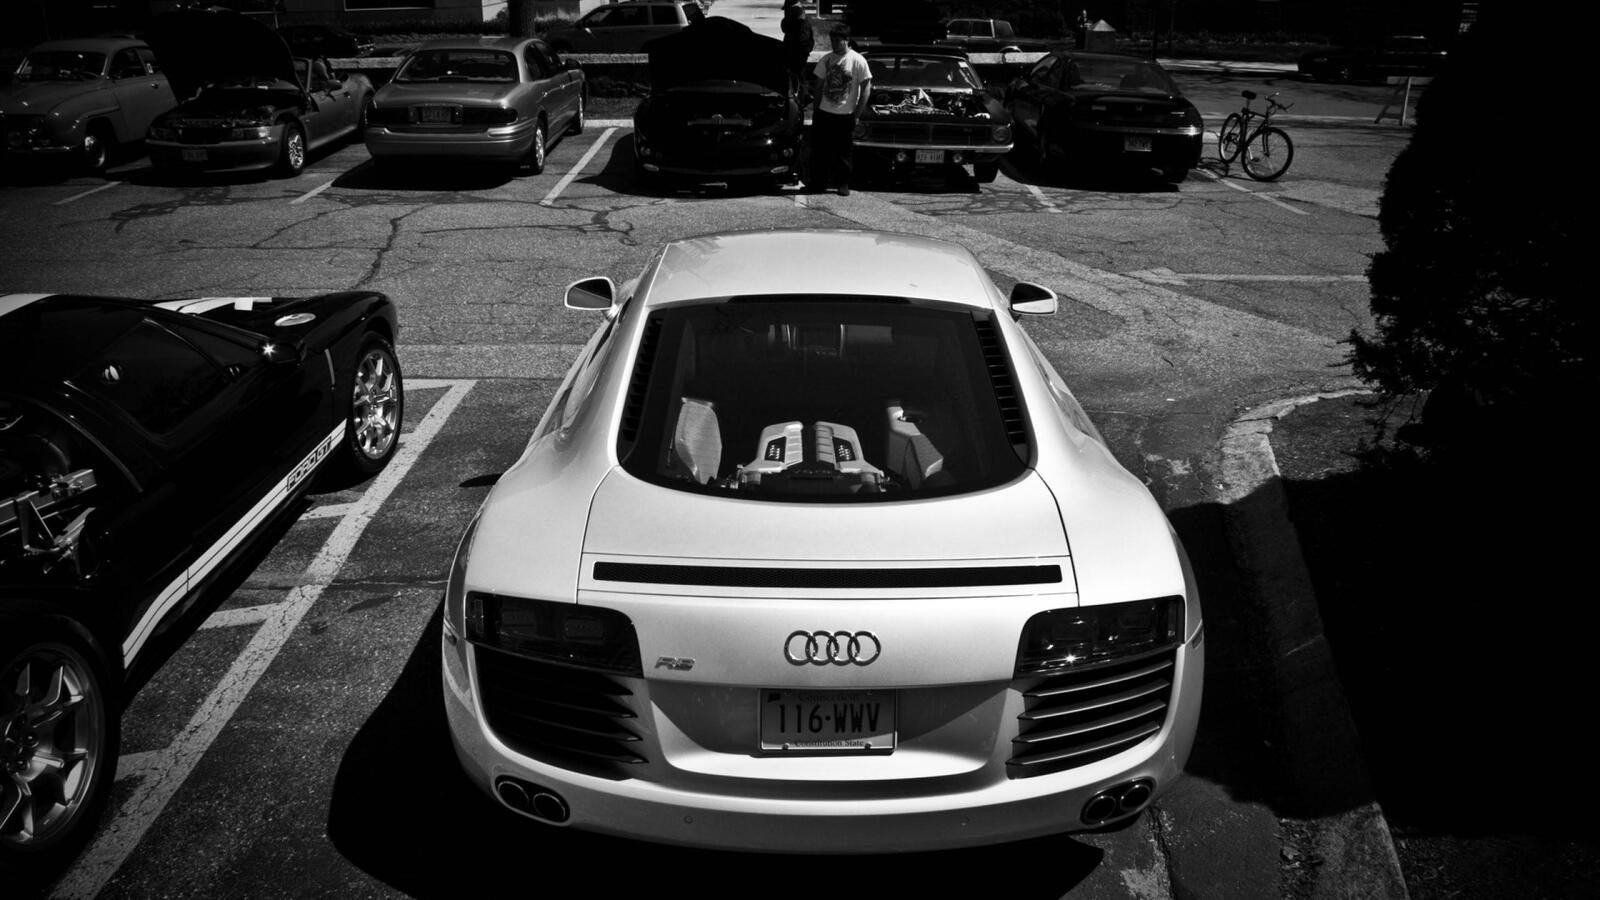 Wallpapers Audi white car view from behind on the desktop